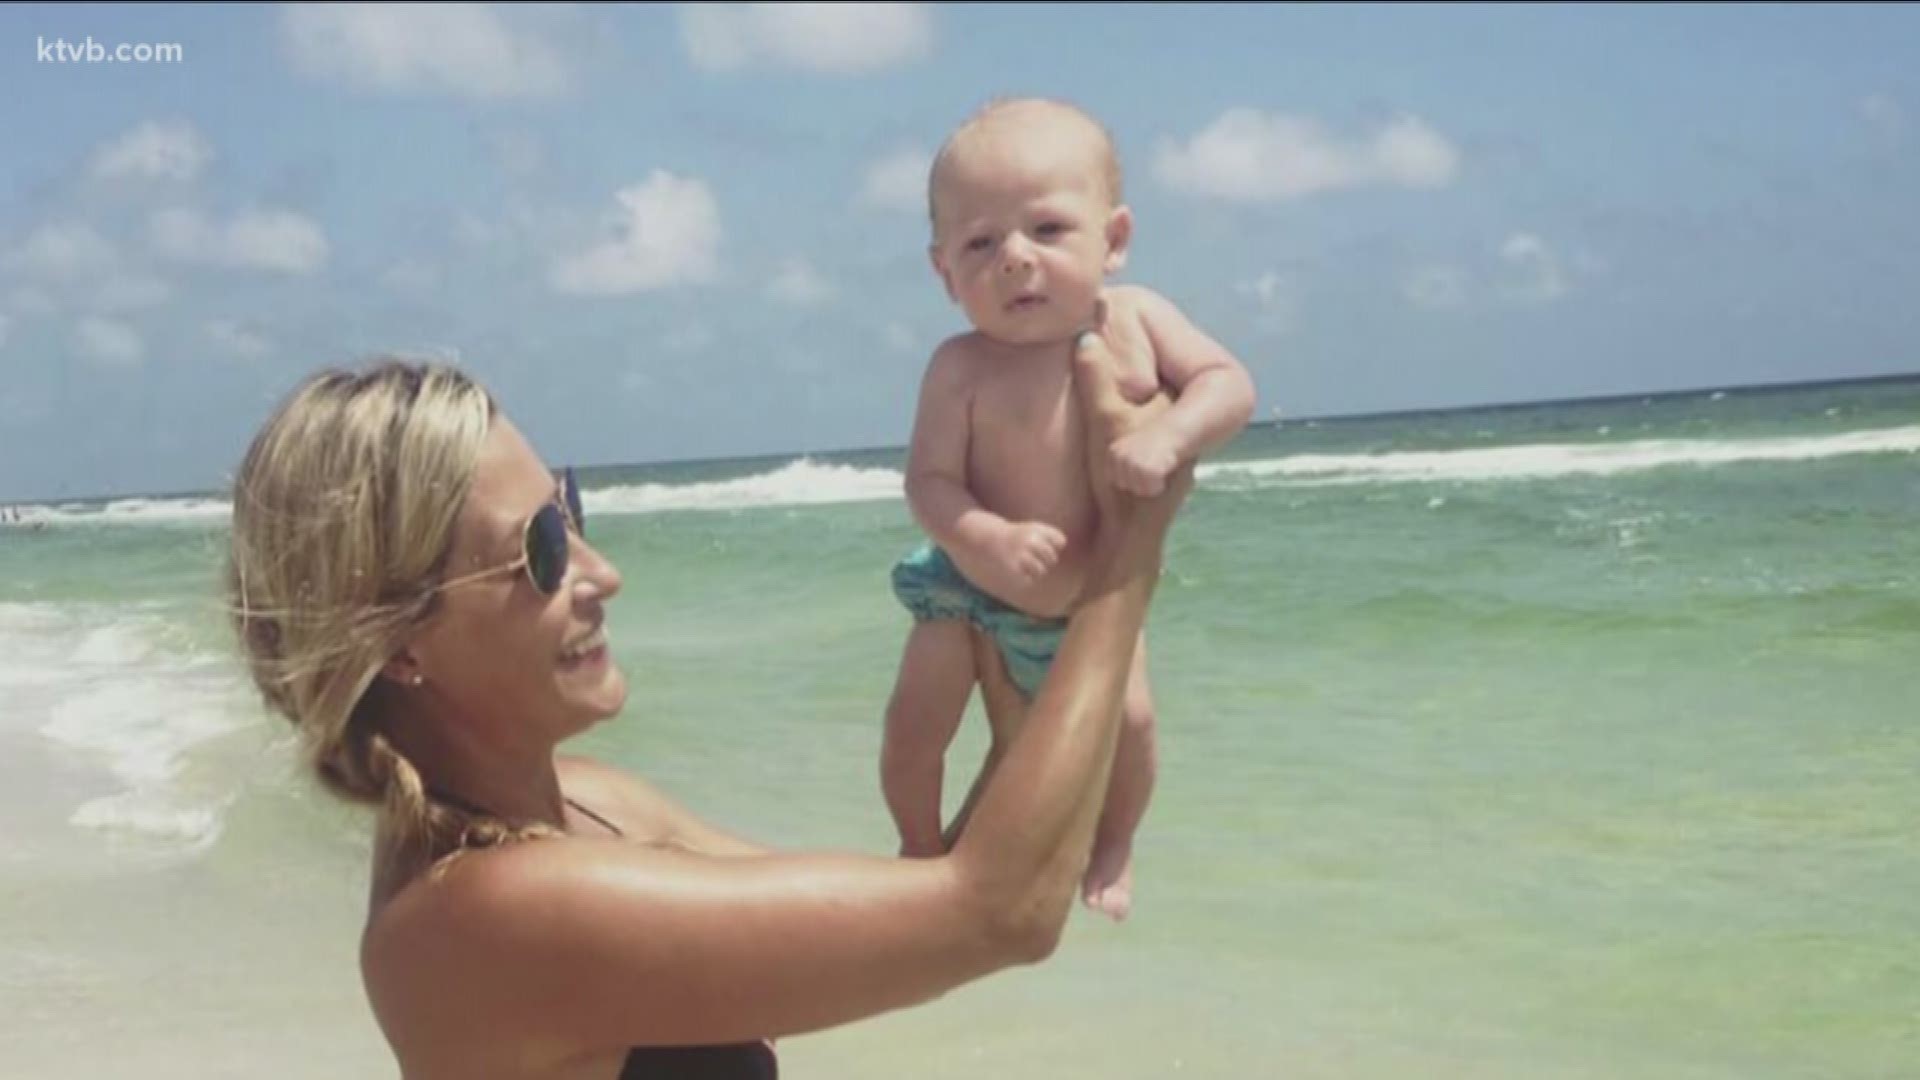 Less than a year after Jana Roberts lost her infant son to SIDS, she honoring him in a very special way.